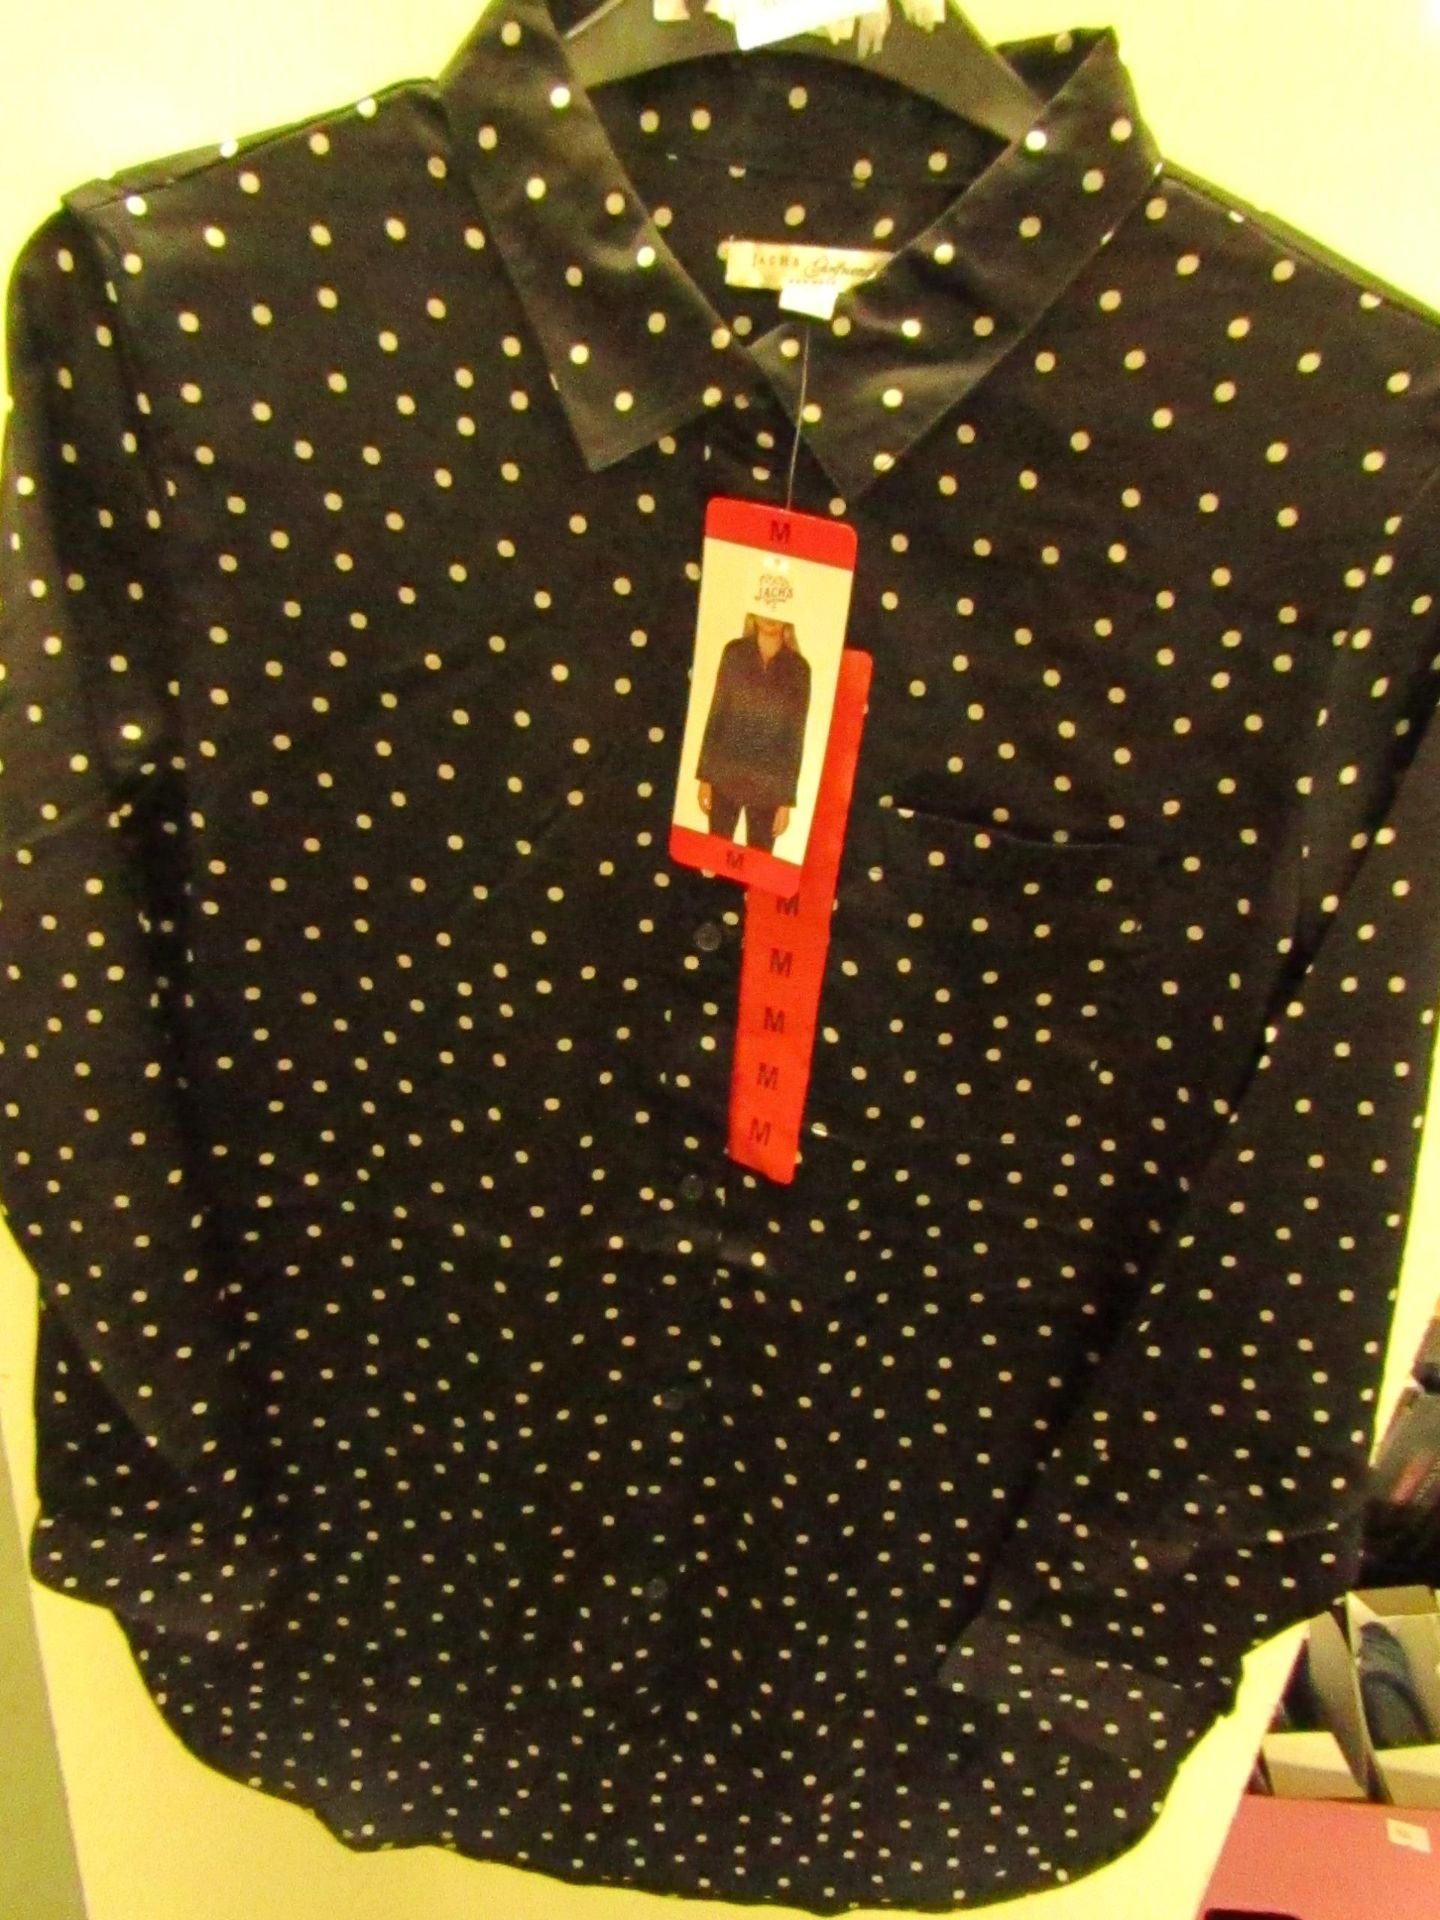 Jachs New York Girlfriends Blouse,Black/White Spots - Size M New With Tags